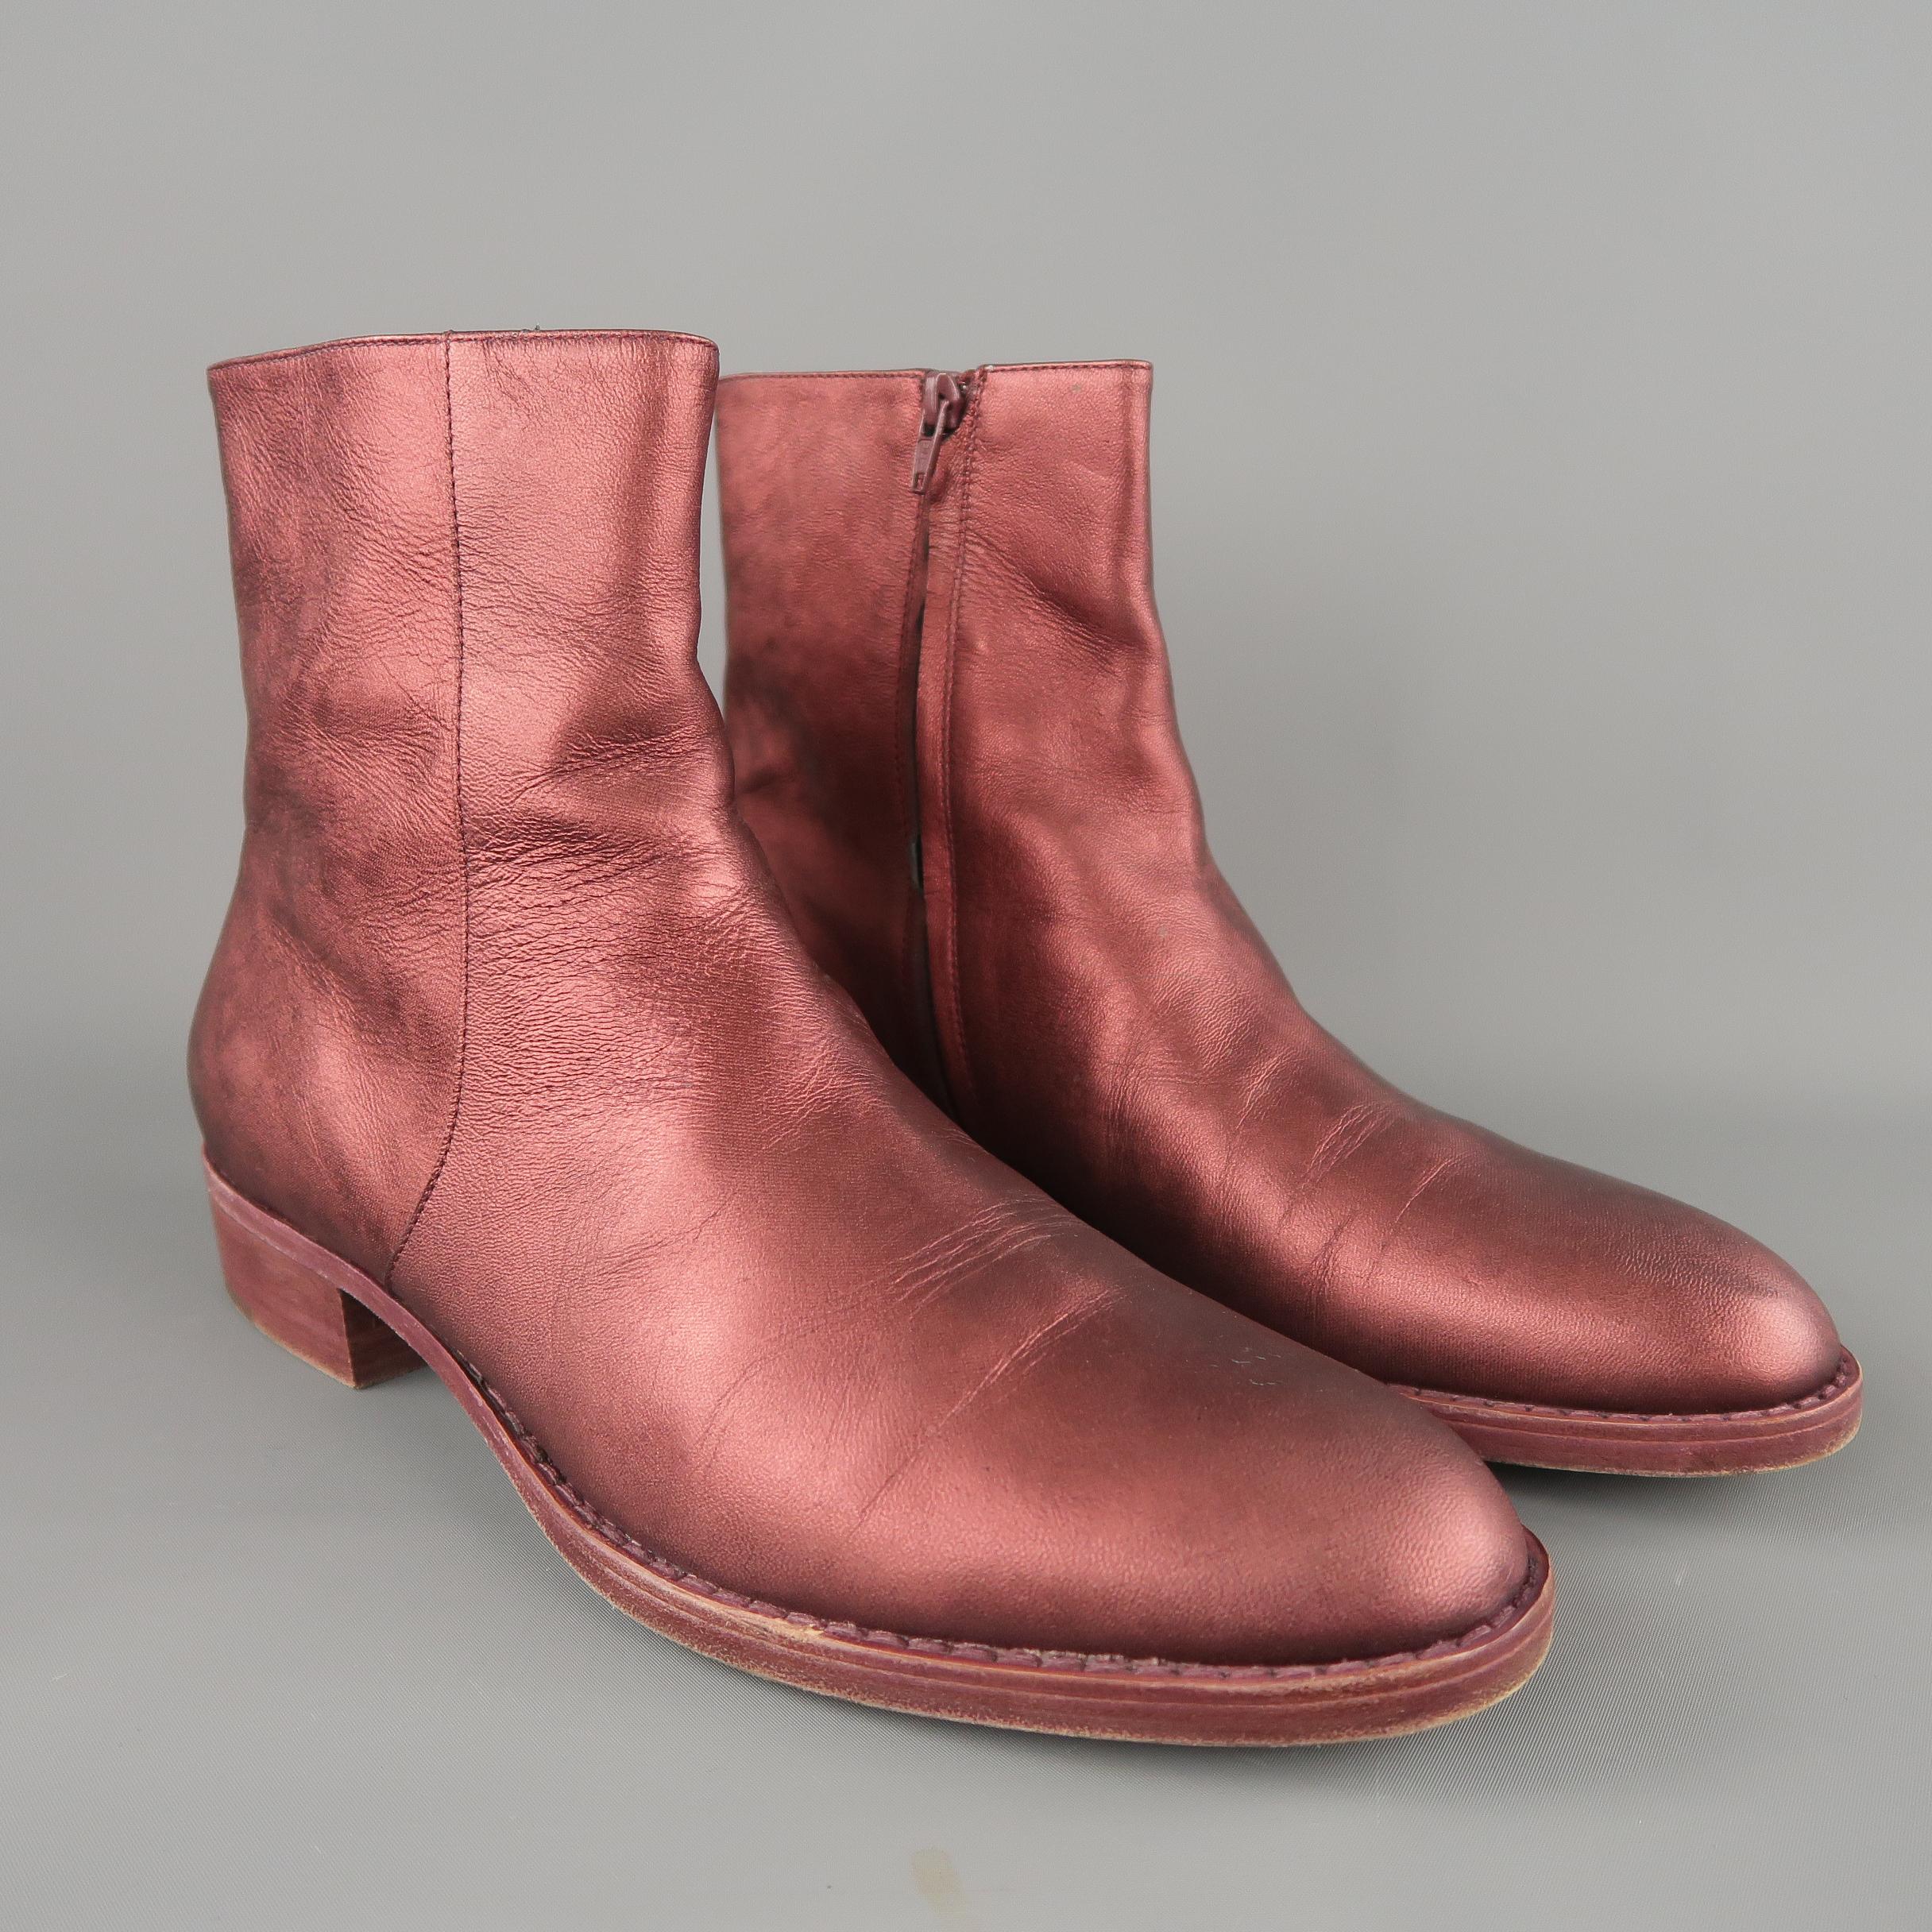 ELSA ankle boots come in burgundy metallic leather with a colored sole and inner zip closure. With Box. Made in Italy.
 
Excellent Pre-Owned Condition.
Marked: IT 43.5
 
Measurements:
 
Length:12 in.
Width: 4.24 in.
Height: 7 in.
Heel: 1.25 in.